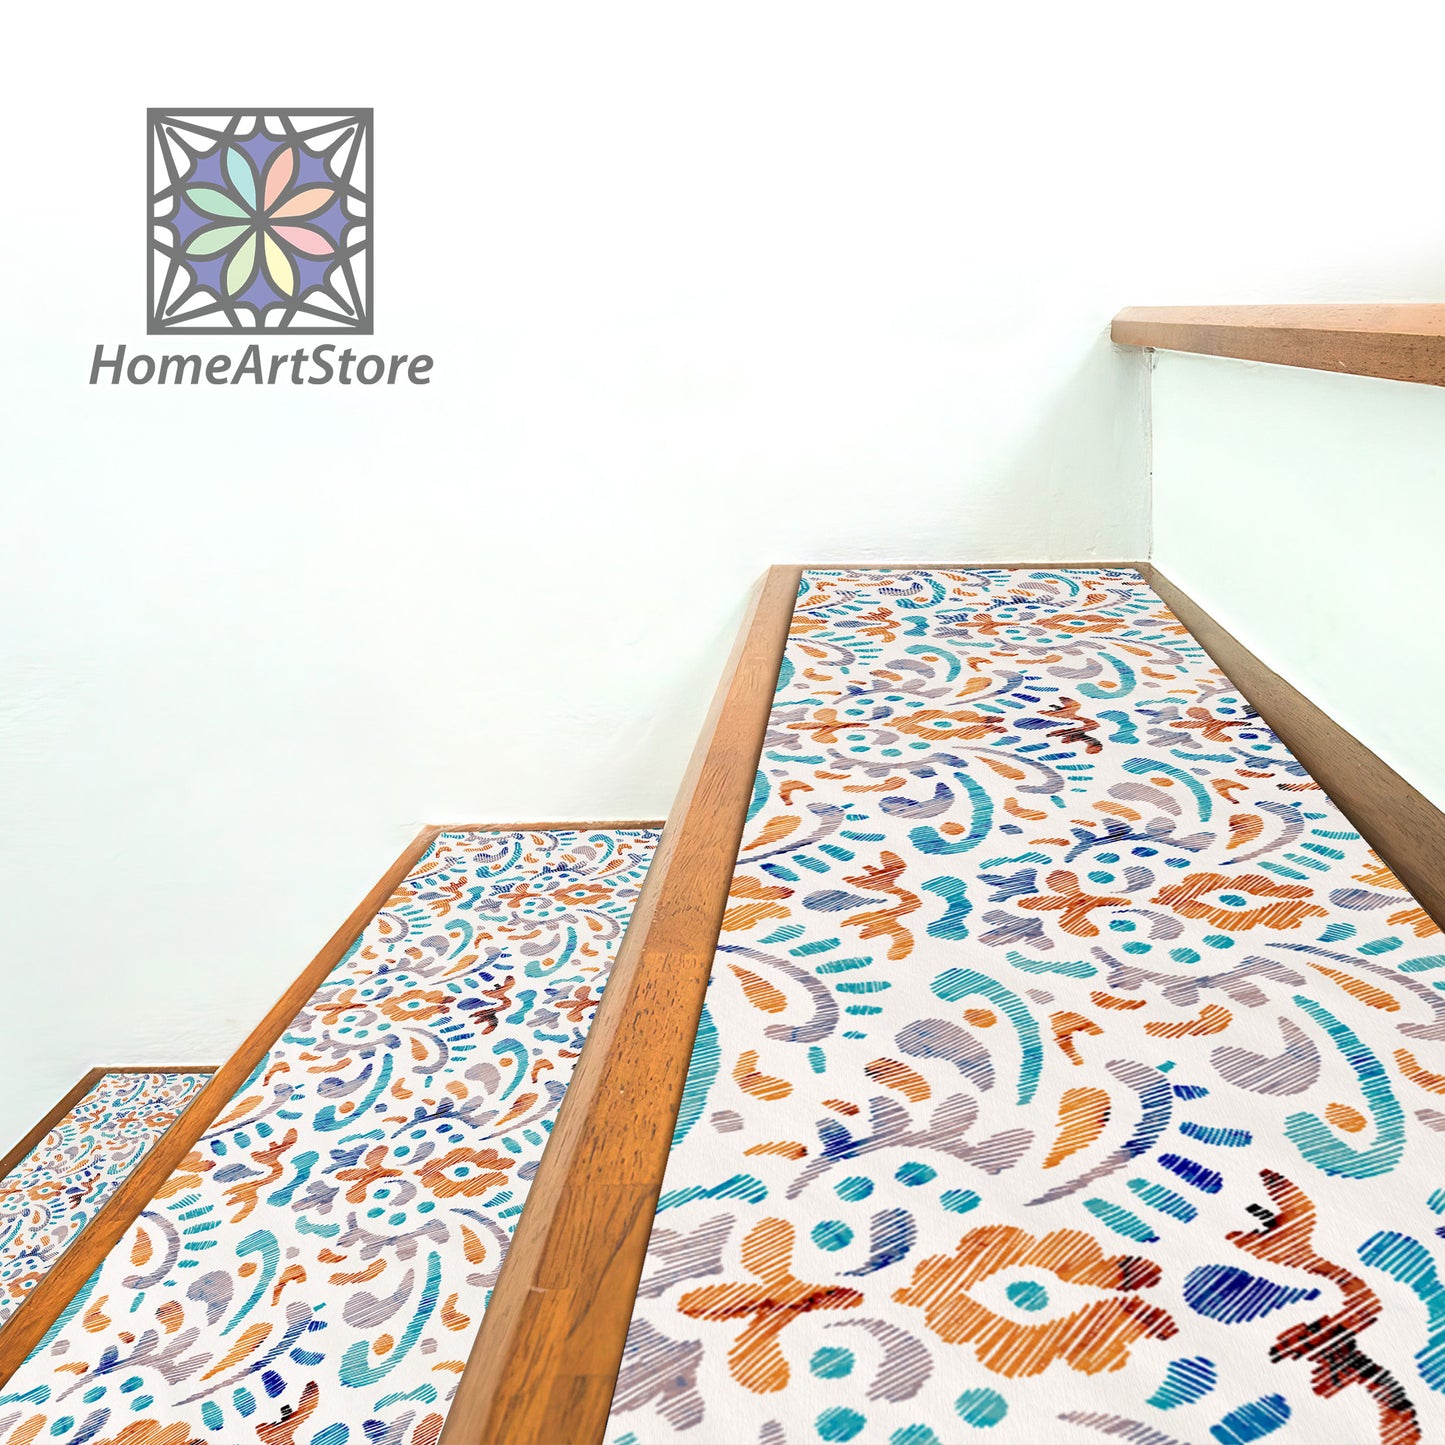 Turkish Motif Stair Rugs, Colorful Embroidered Carpet, Bohemian Stair Step Mats, Boho Style Decor, Decorative Abstract Step Mat